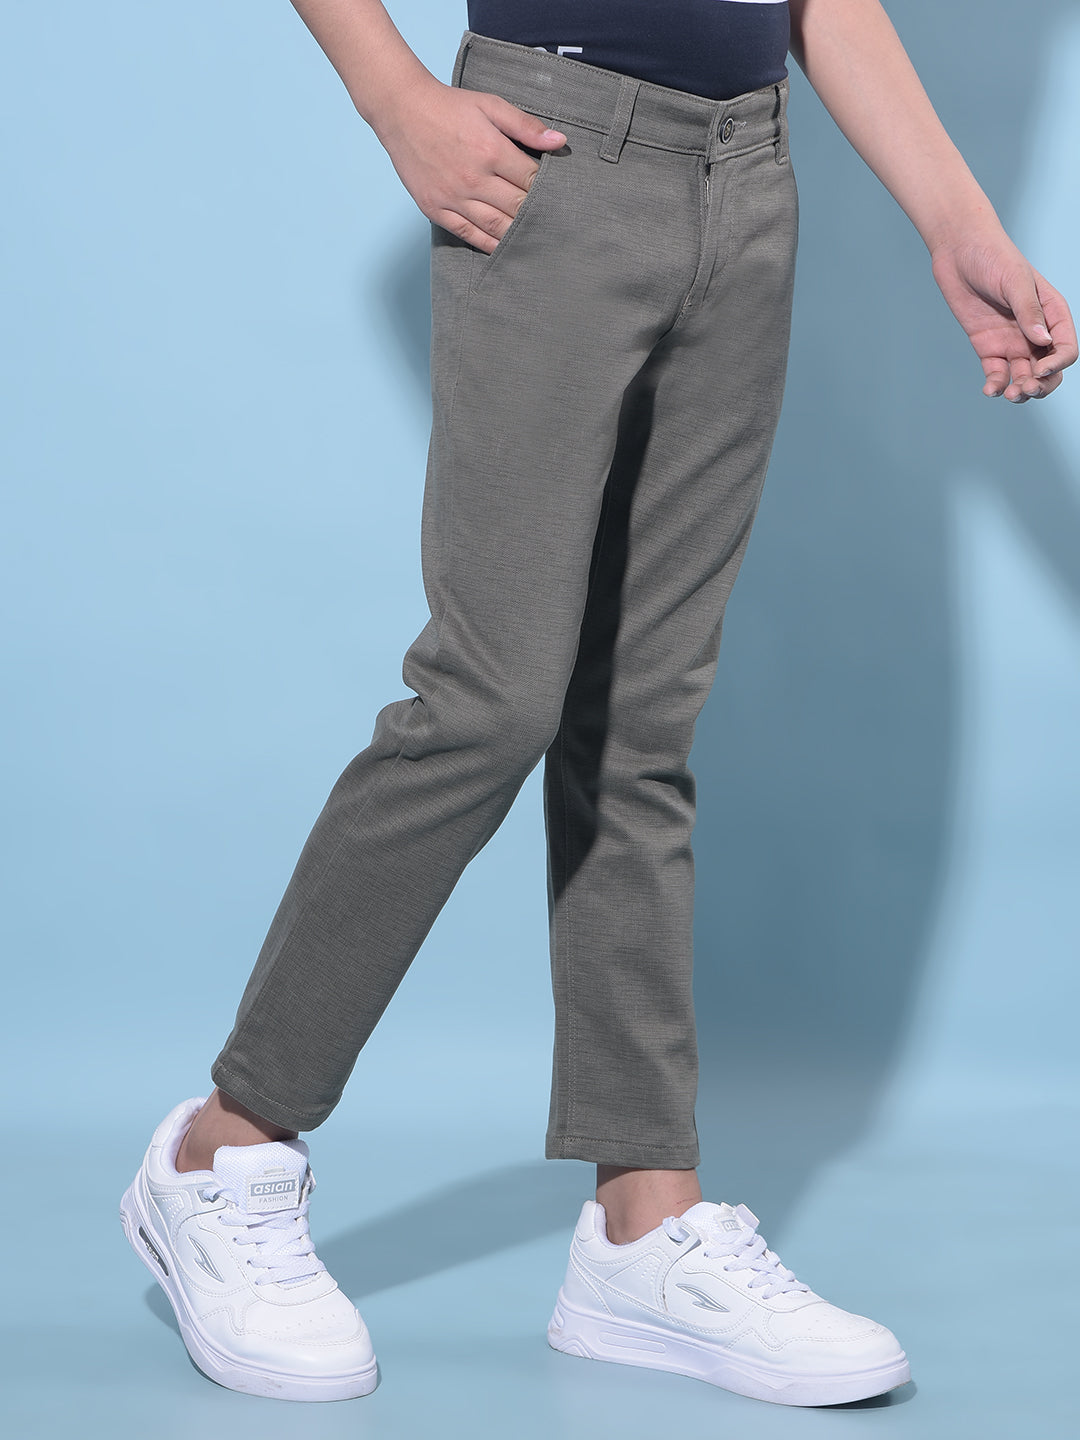 Olive Printed Cotton Chinos Trousers-Boys Trousers-Crimsoune Club